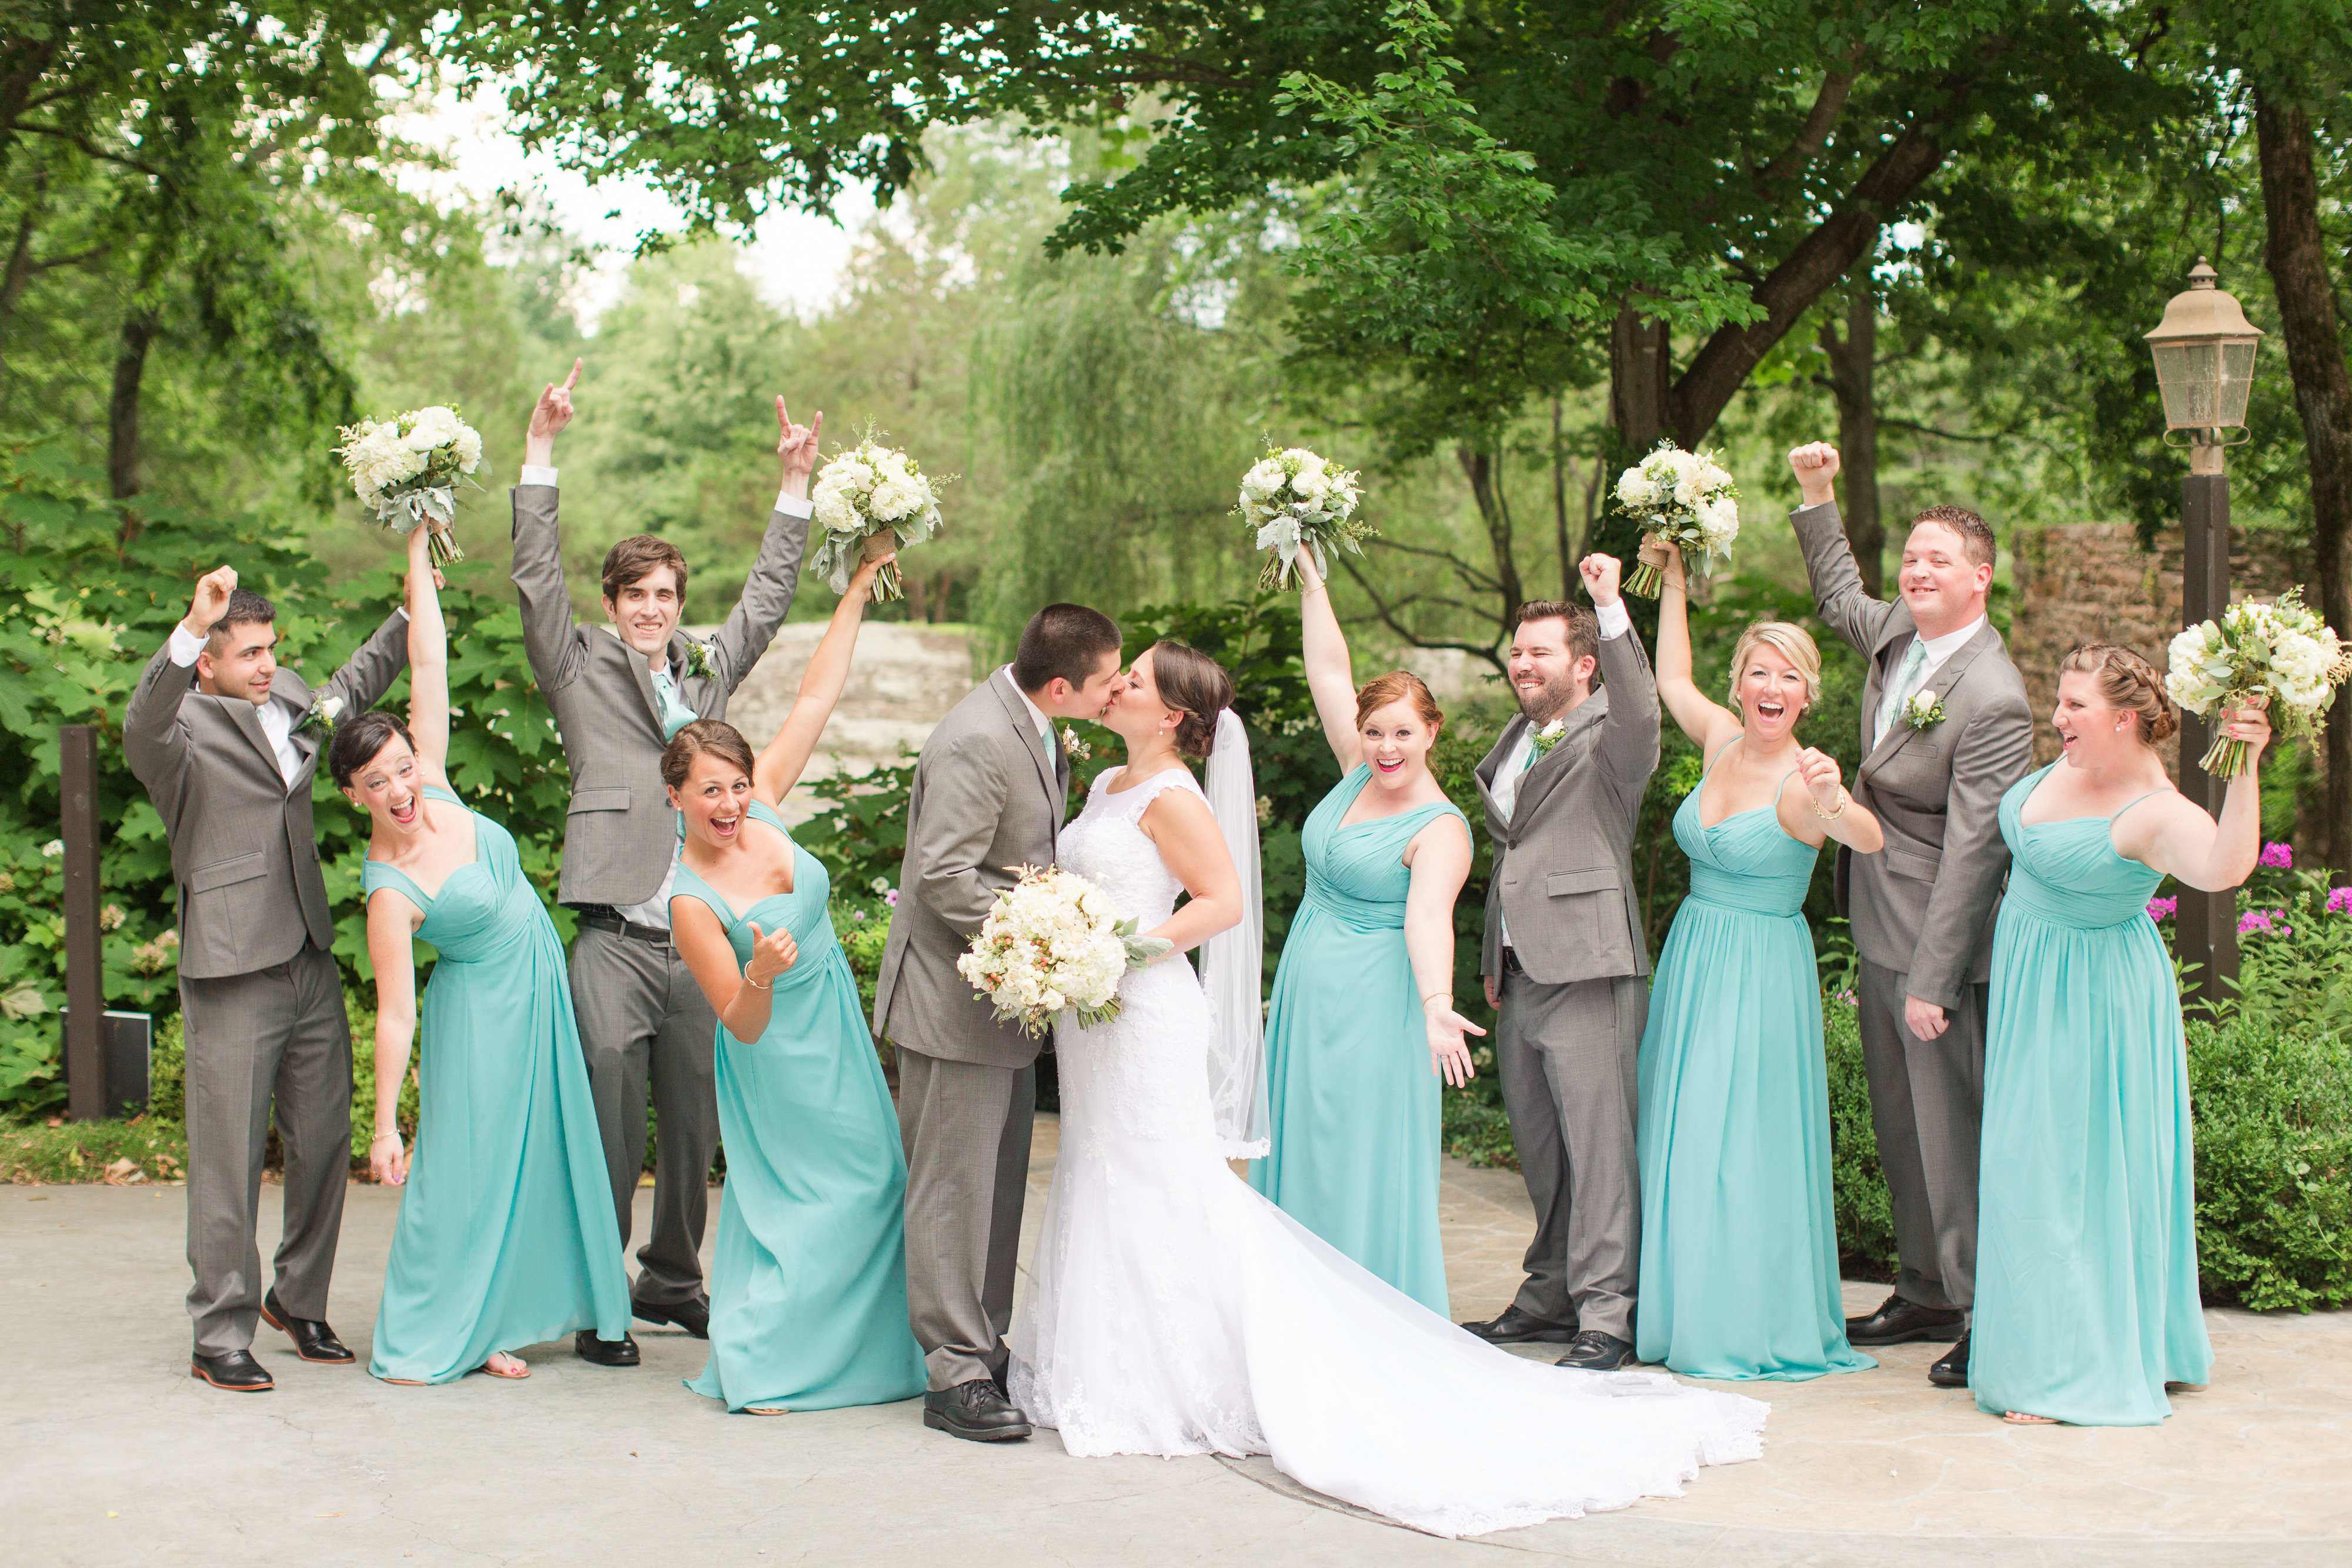 Curtis and Lauren's bridal party is definitely supportive of their marriage! 